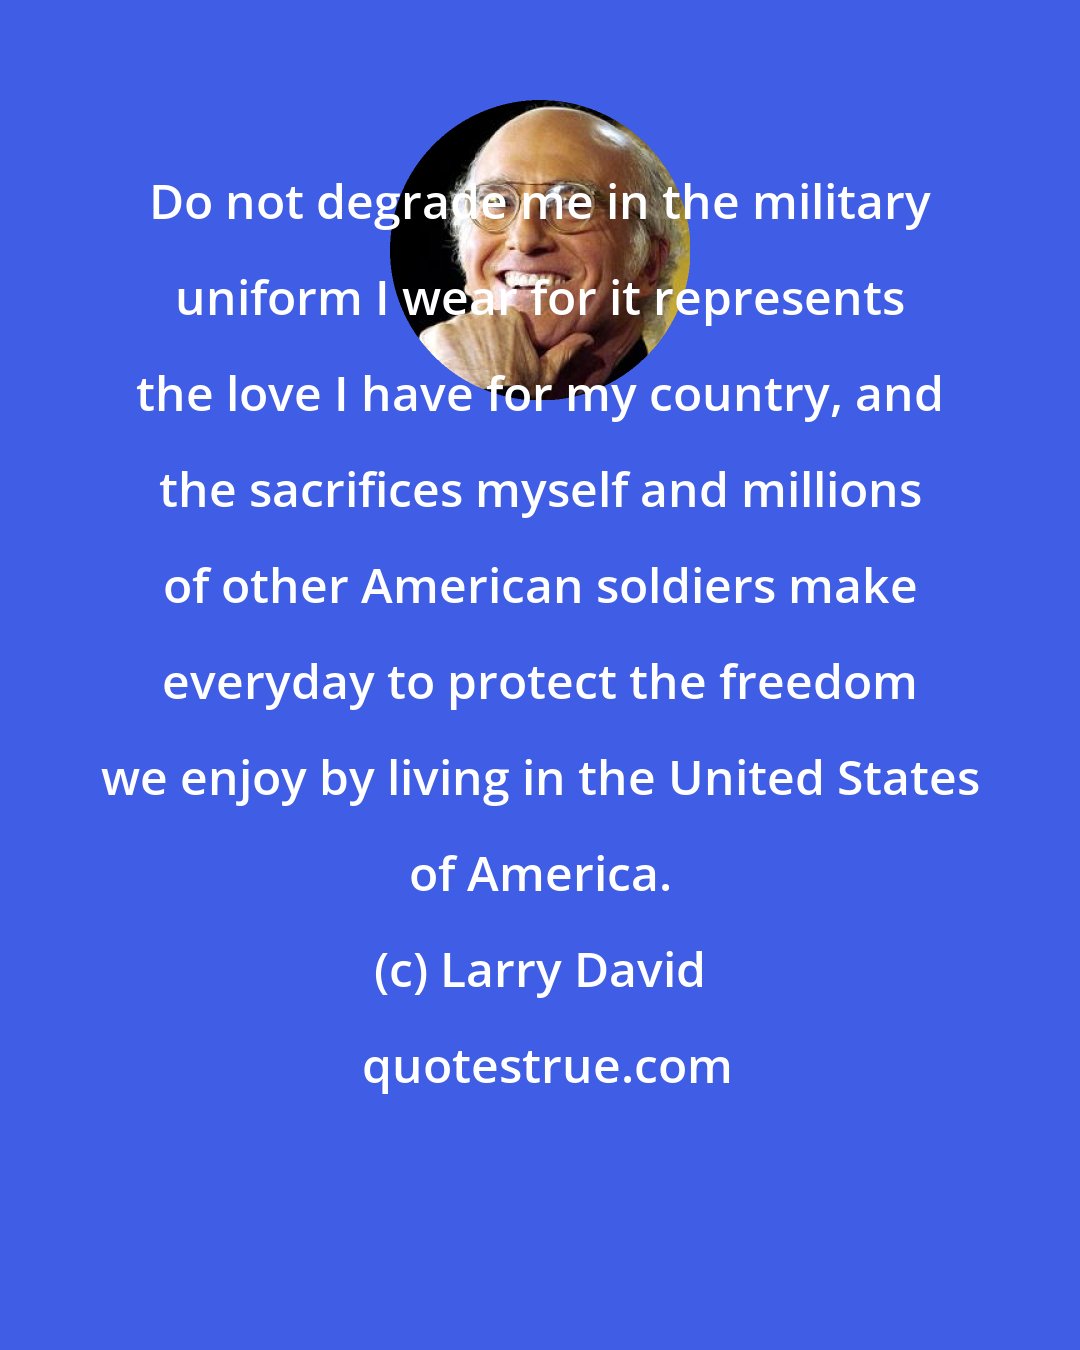 Larry David: Do not degrade me in the military uniform I wear for it represents the love I have for my country, and the sacrifices myself and millions of other American soldiers make everyday to protect the freedom we enjoy by living in the United States of America.